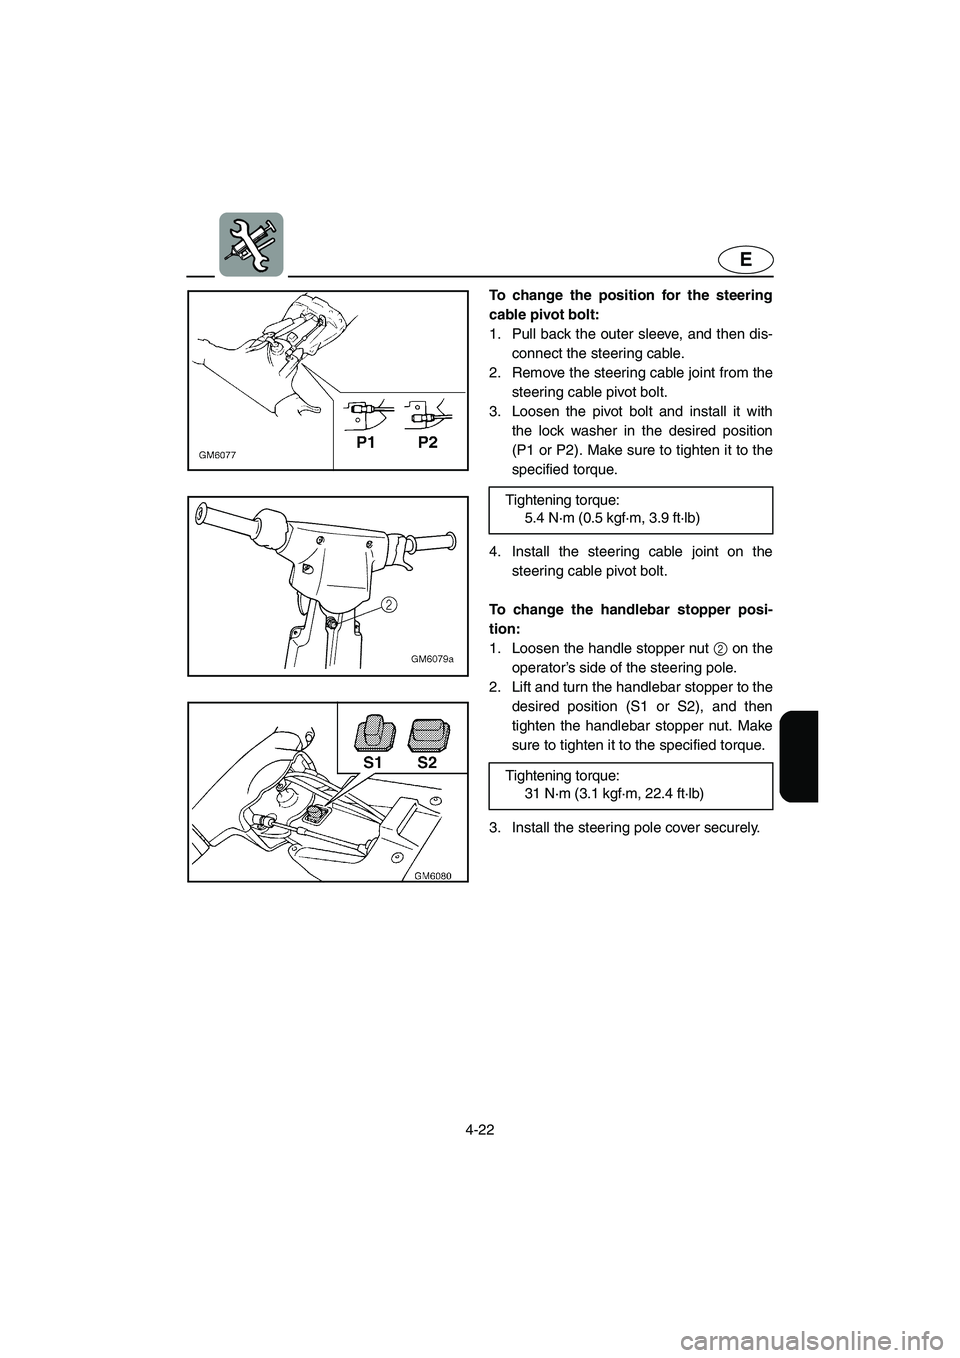 YAMAHA SUPERJET 2002  Owners Manual 4-22
E
To change the position for the steering
cable pivot bolt: 
1. Pull back the outer sleeve, and then dis-
connect the steering cable. 
2. Remove the steering cable joint from the
steering cable p